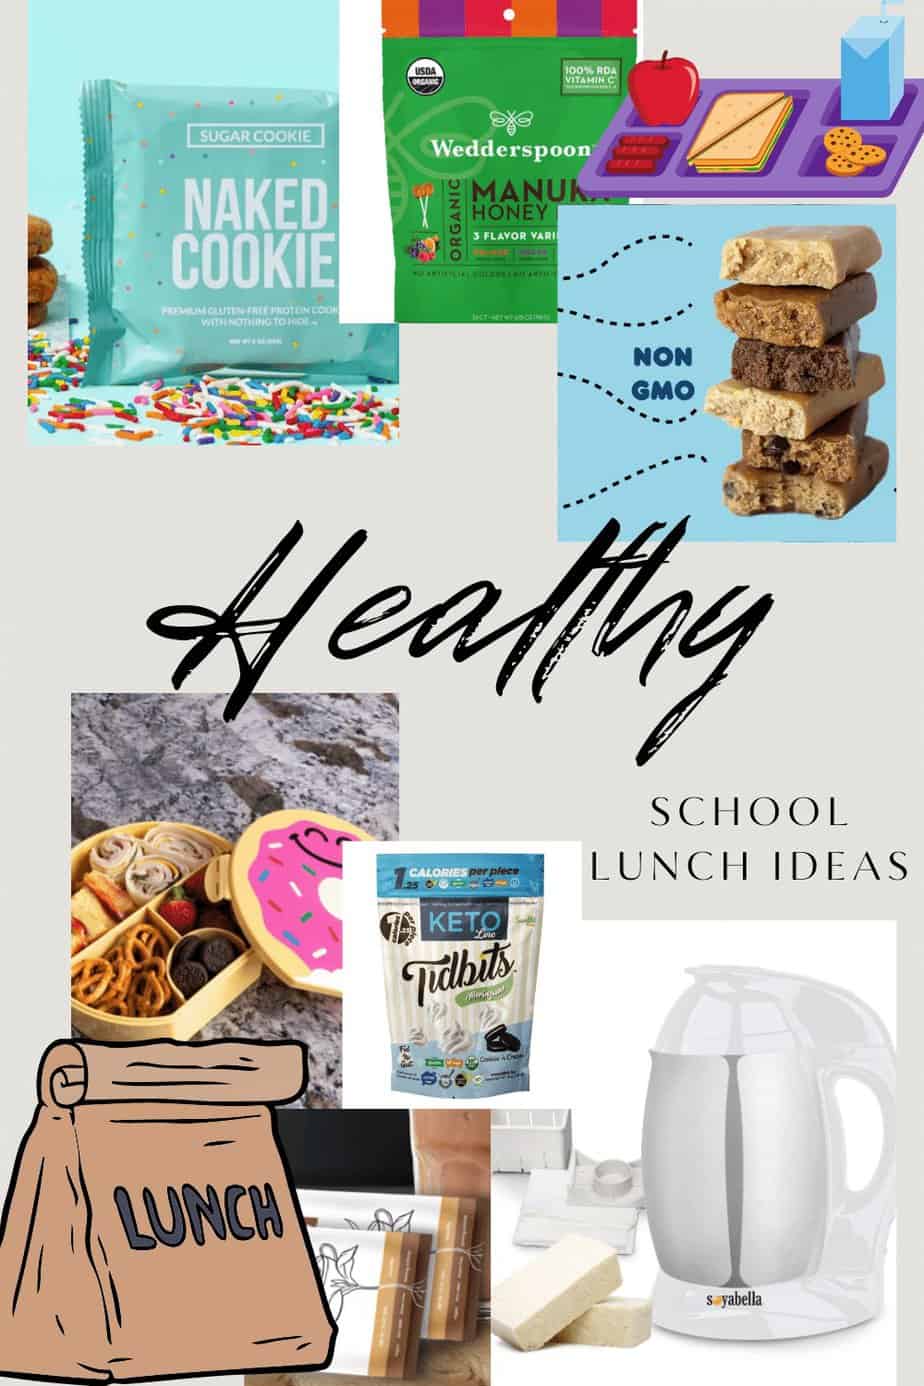 Healthier Snack Ideas For School Lunches